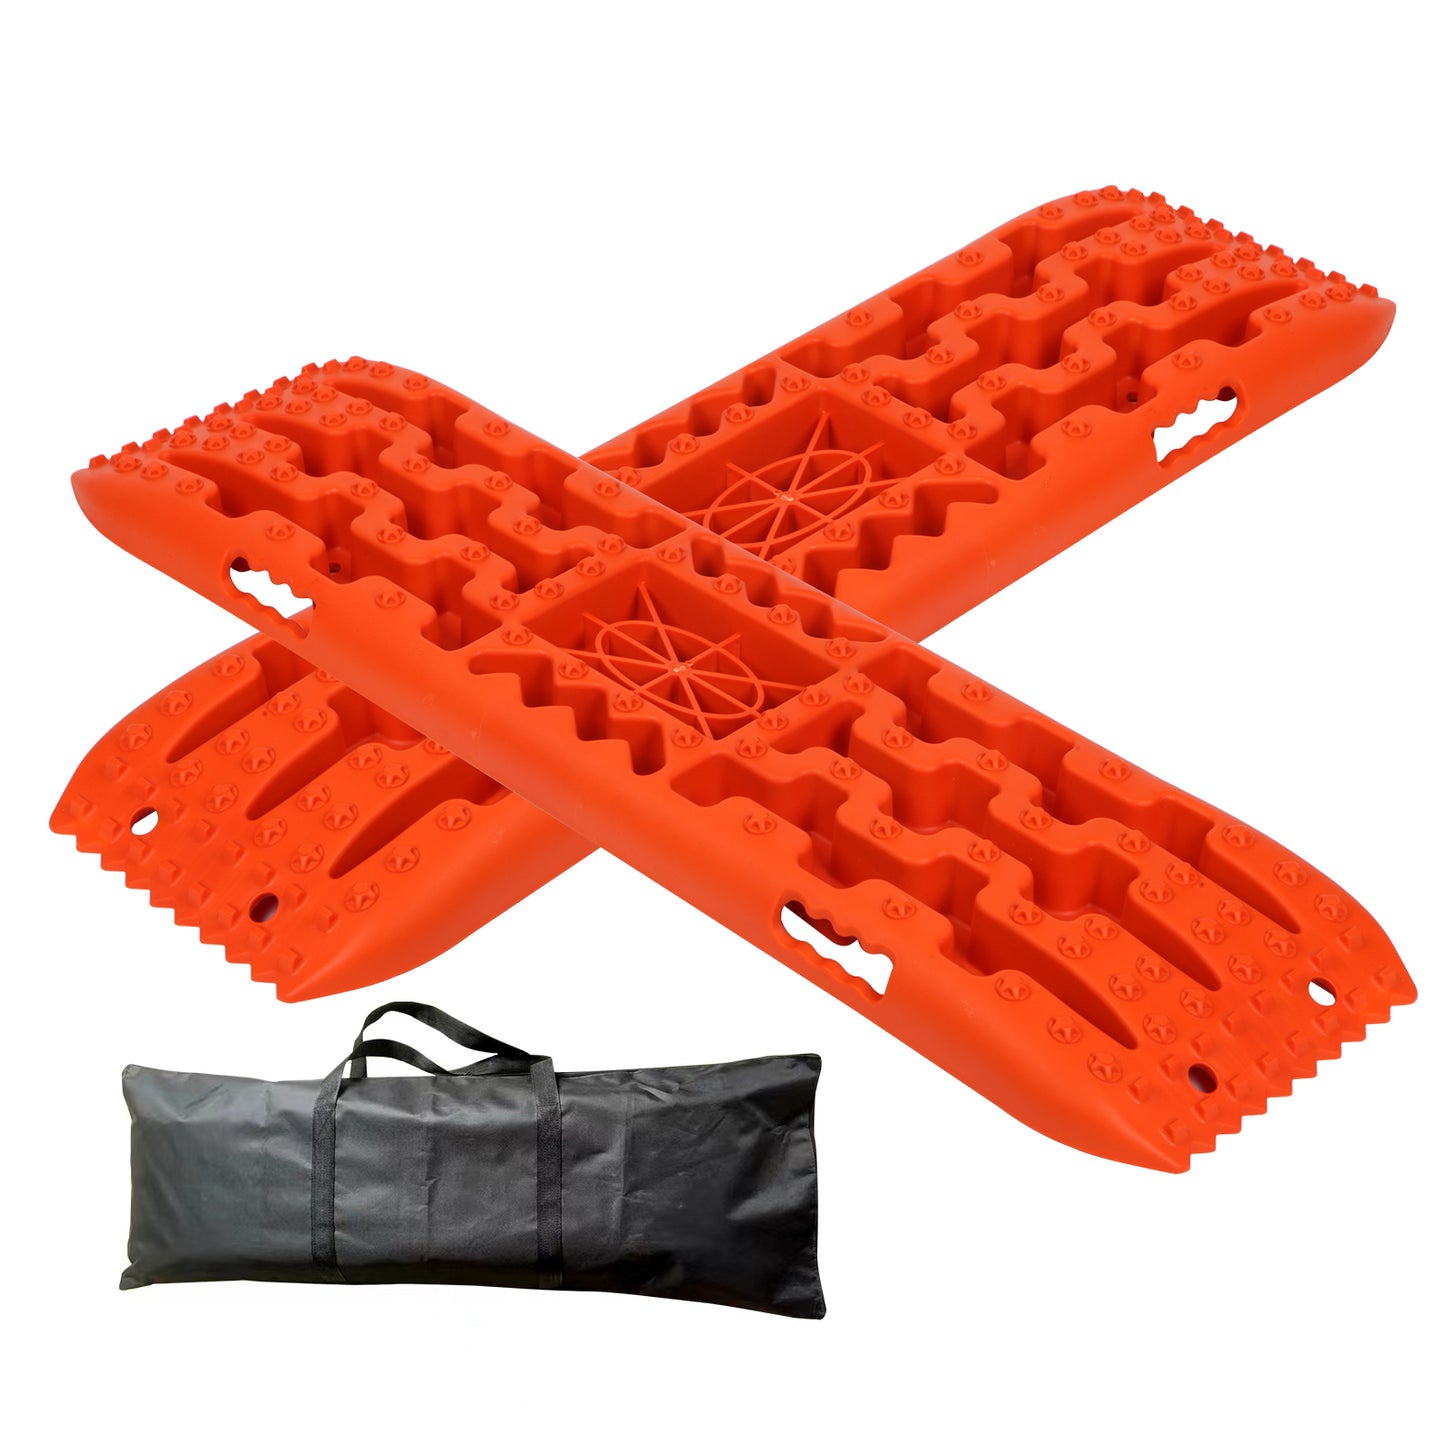 Off-Road Traction Boards with Jack Lift Base, 2Pcs Recovery Tracks for Sand, Mud, Snow Tracks - Tire Traction Pads for RV Truck 4X4 Jeep SUV Emergency Tire Traction (Orange)